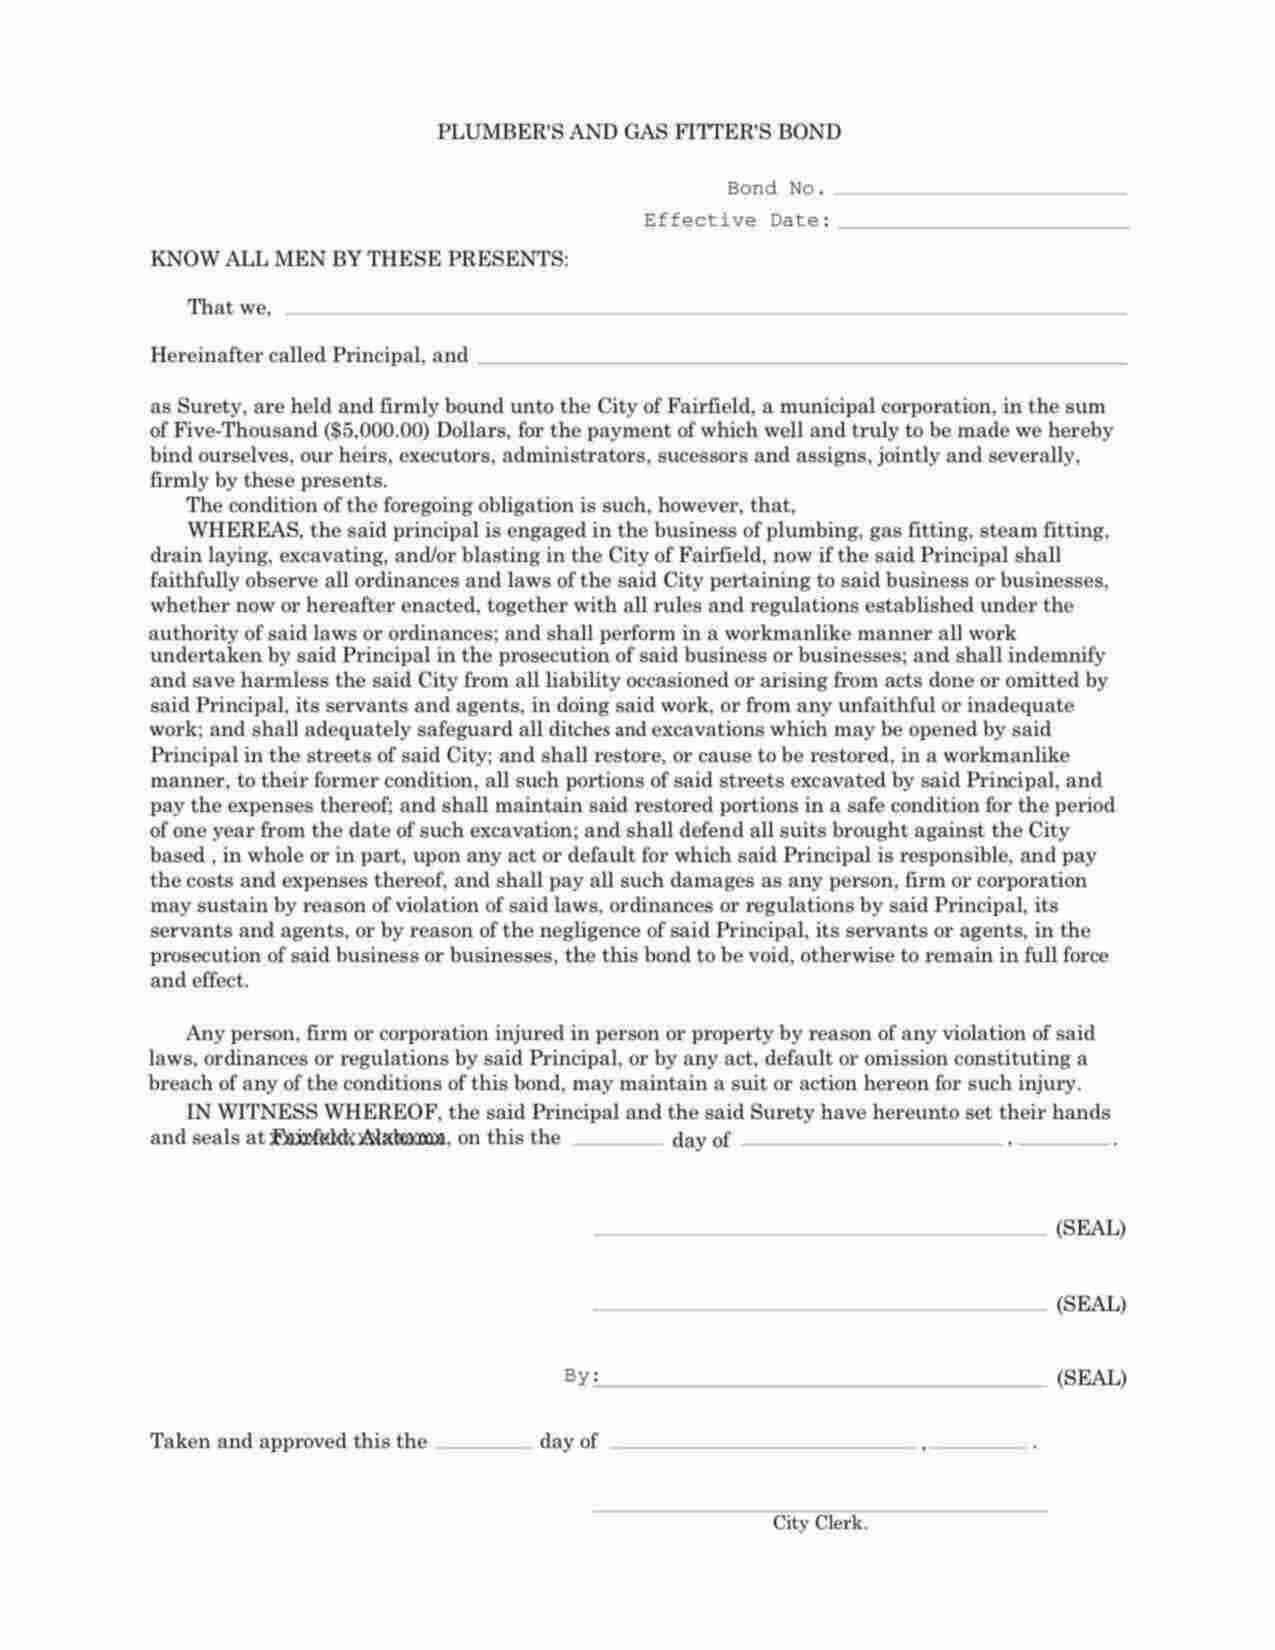 Alabama Plumber and Gas Fitter Bond Form